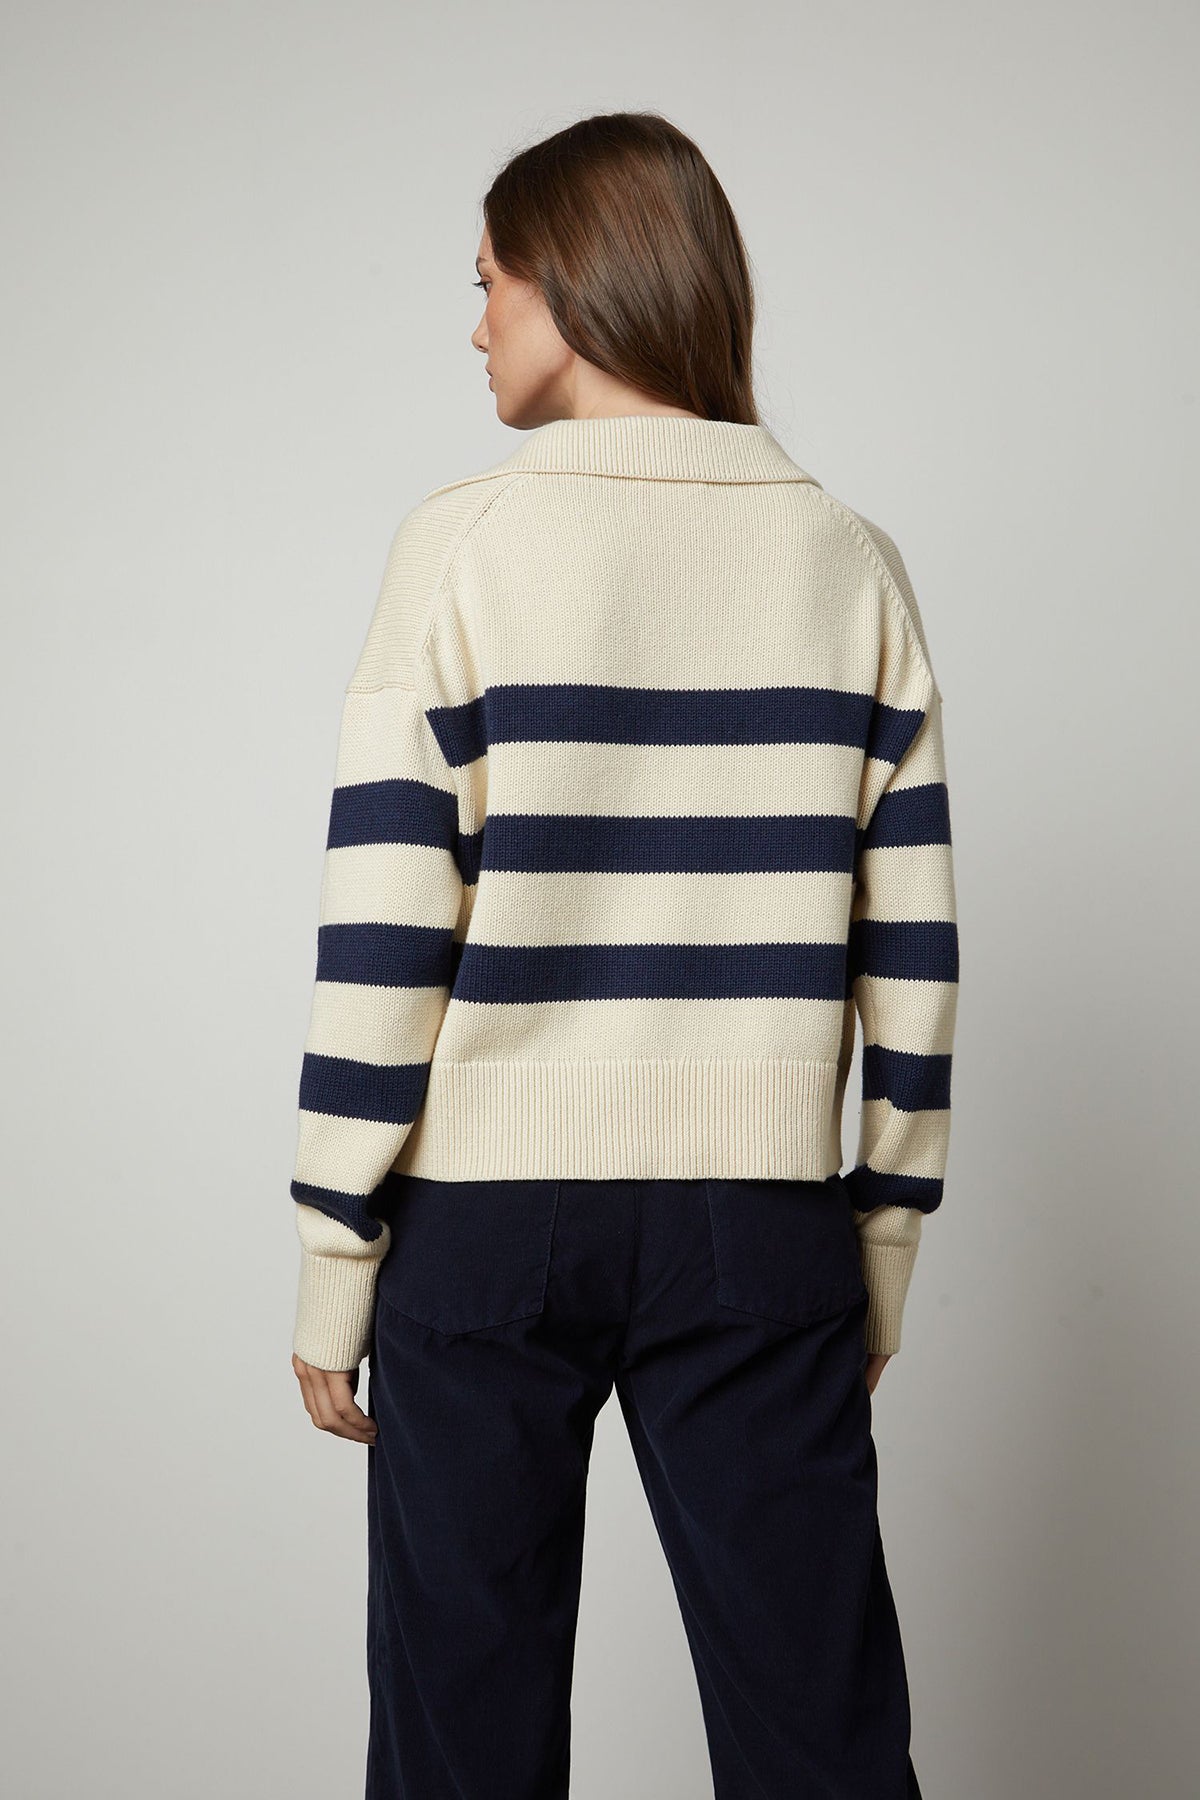 Lucie Sweater